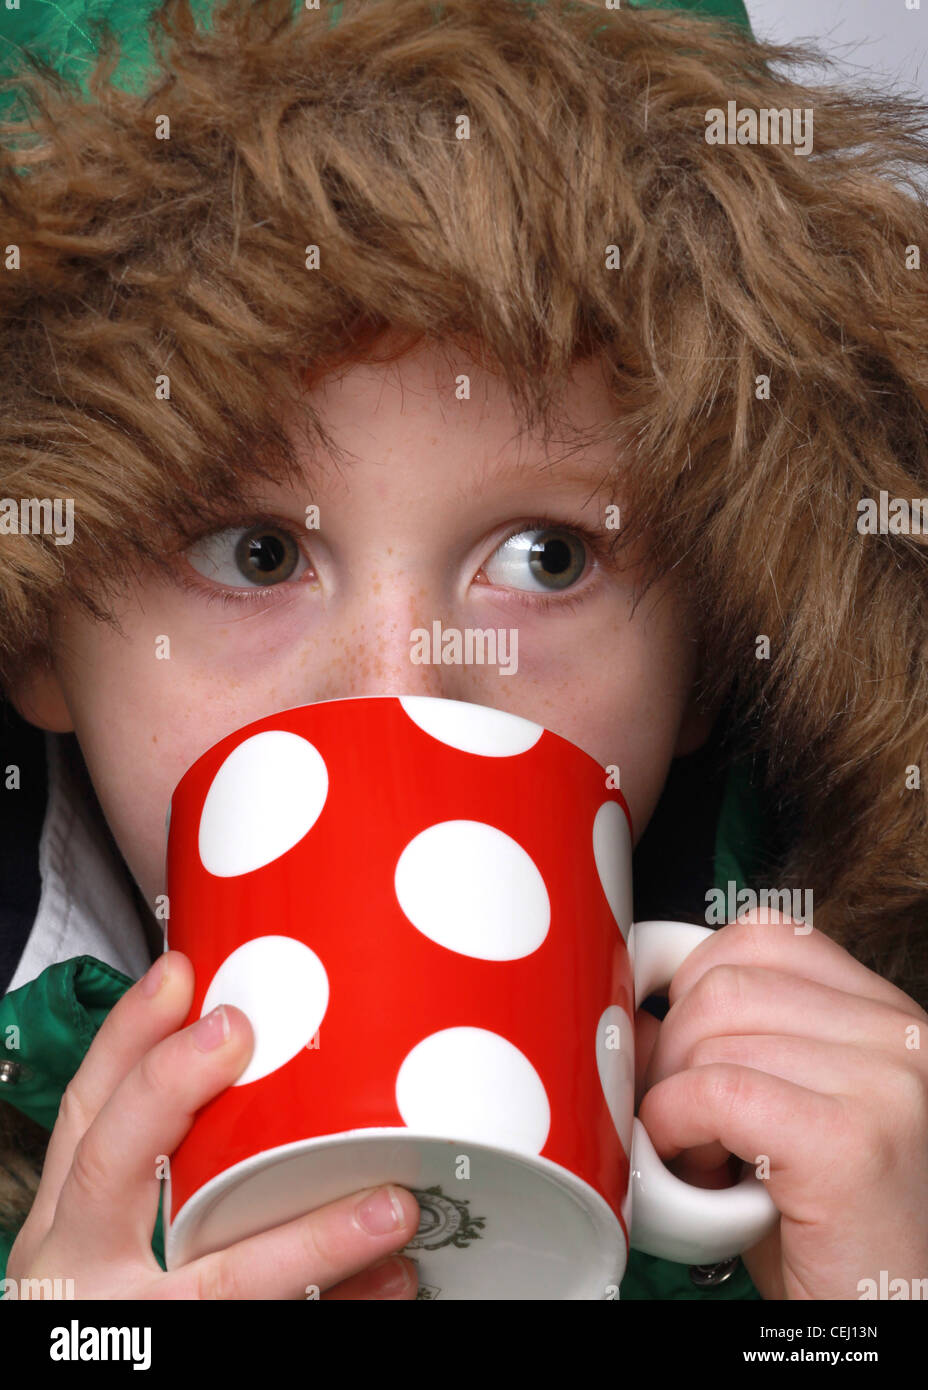 Children drinking from mugs, cold concepts Stock Photo